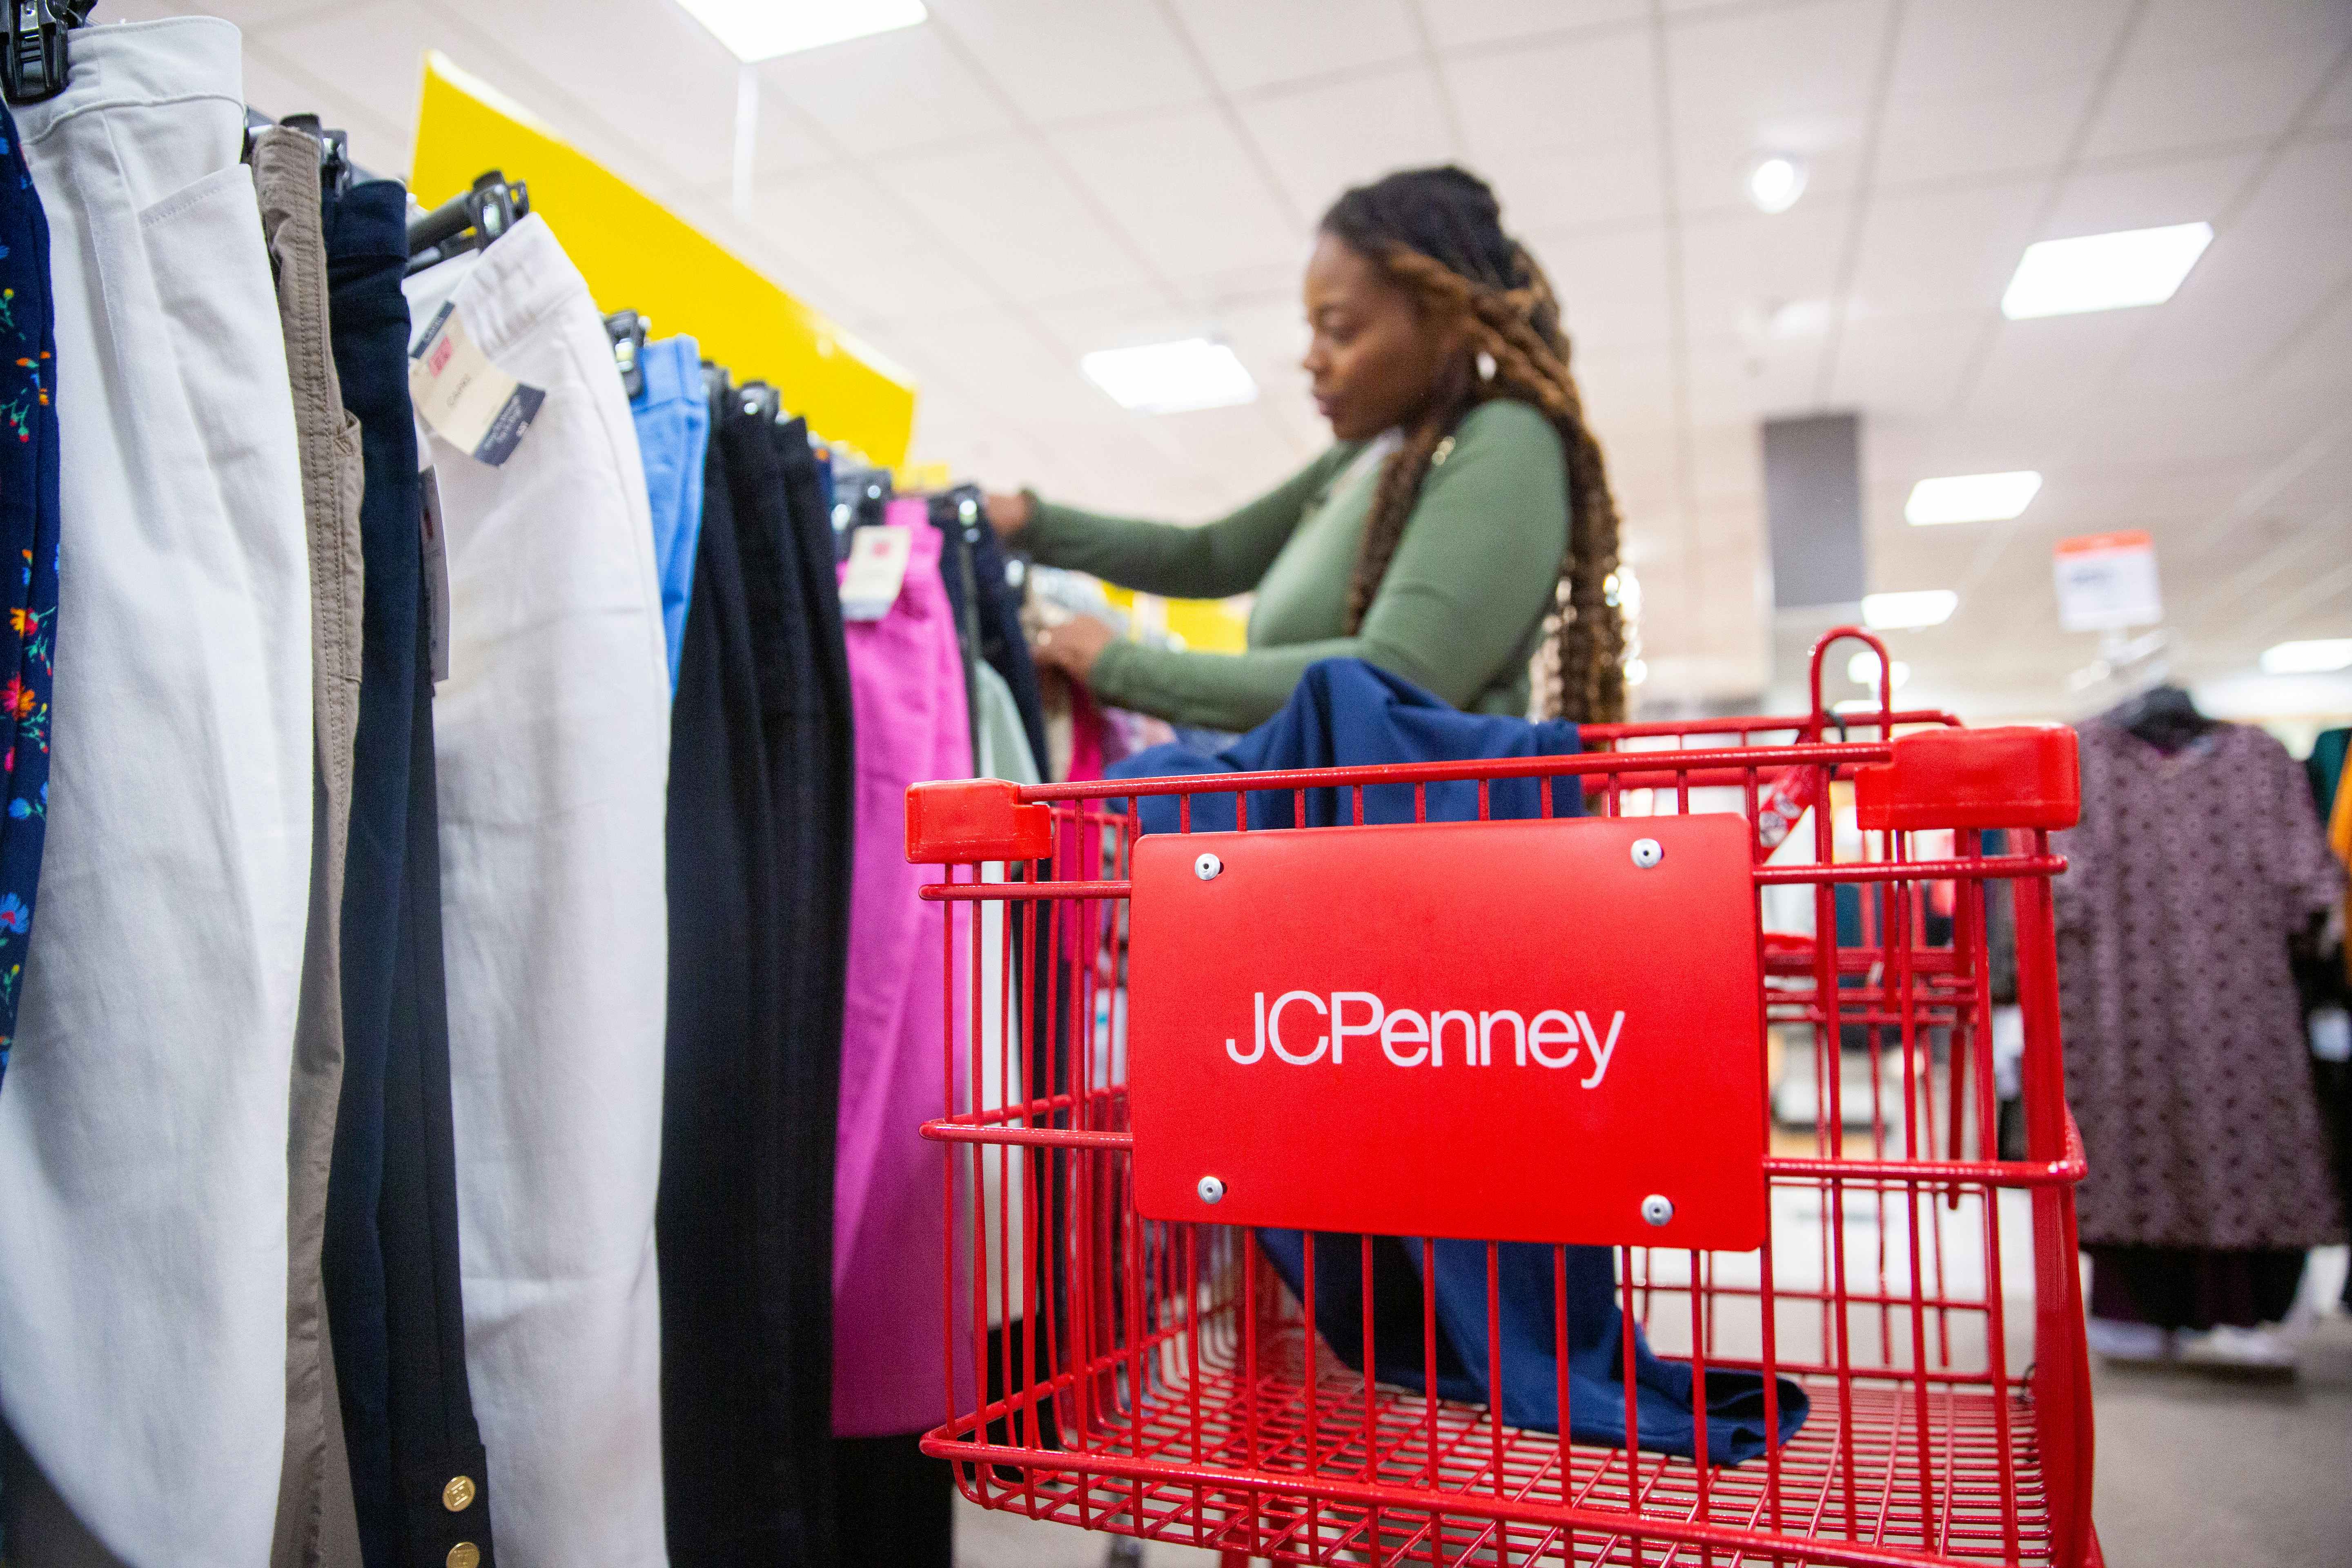 Person shopping with a red JC Penney's cart